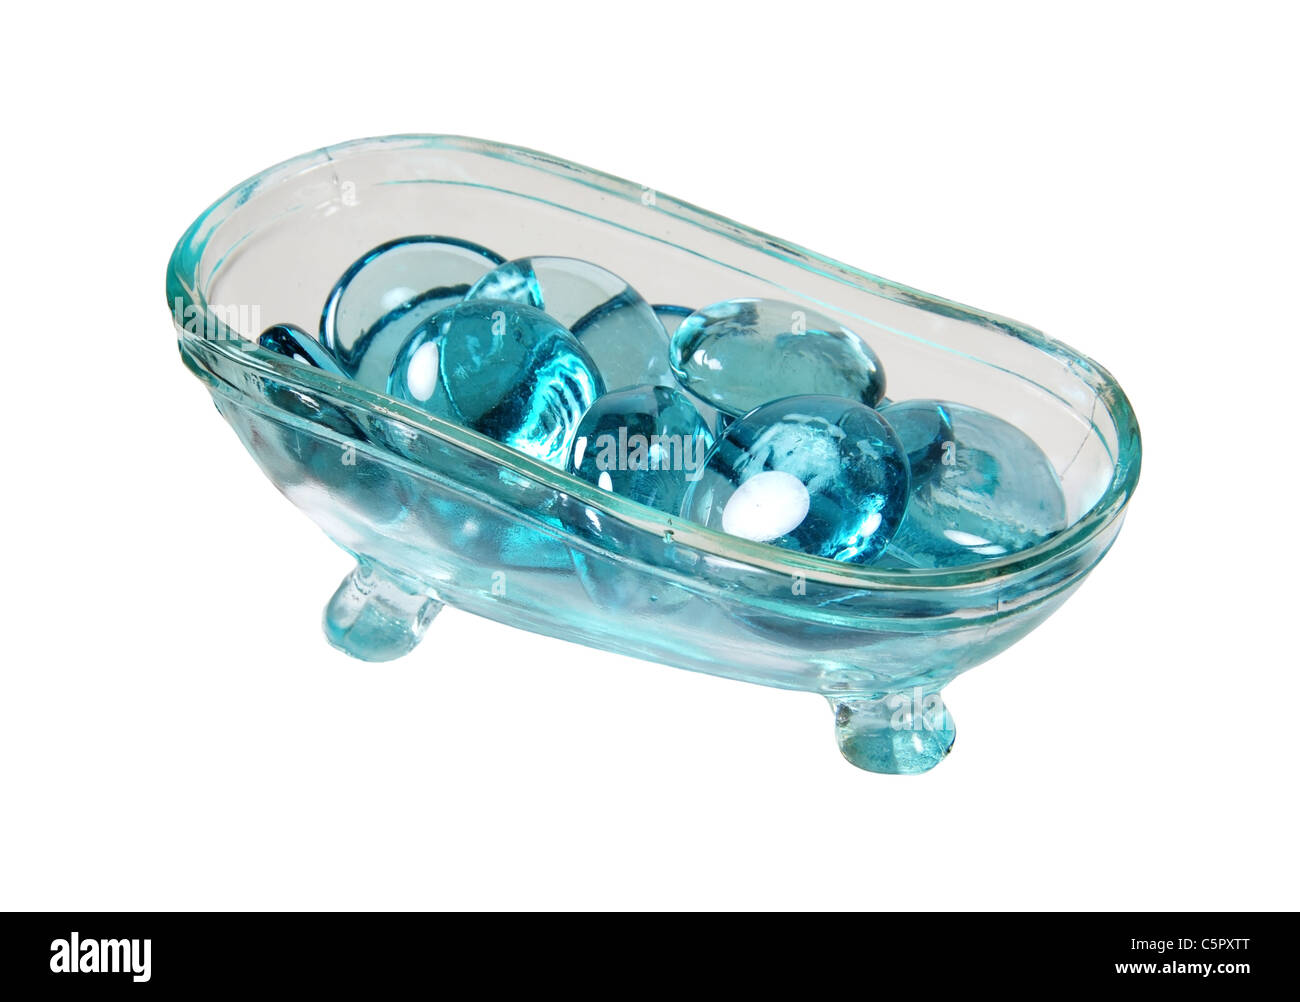 Claw footed crystal bathtub filled with glass water gems Stock Photo